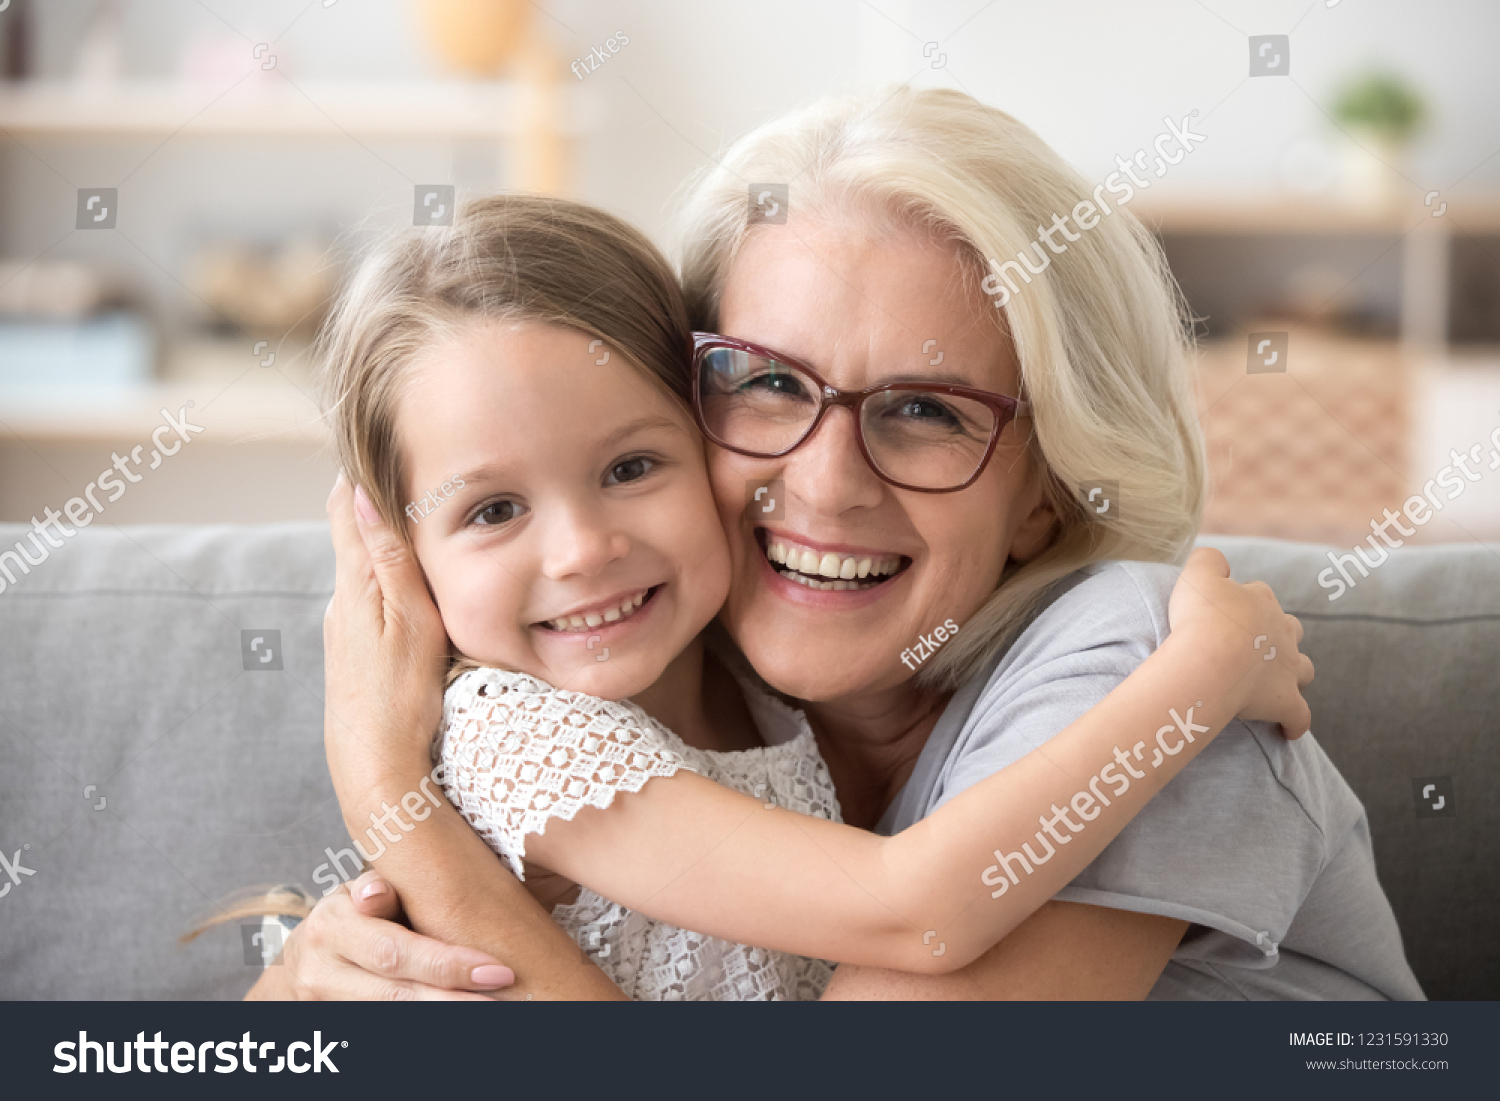 Happy old grandmother hugging little grandchild girl looking at camera, smiling mature mother or senior grandma granny laughing embracing adopted kid granddaughter sitting on couch, headshot portrait #1231591330